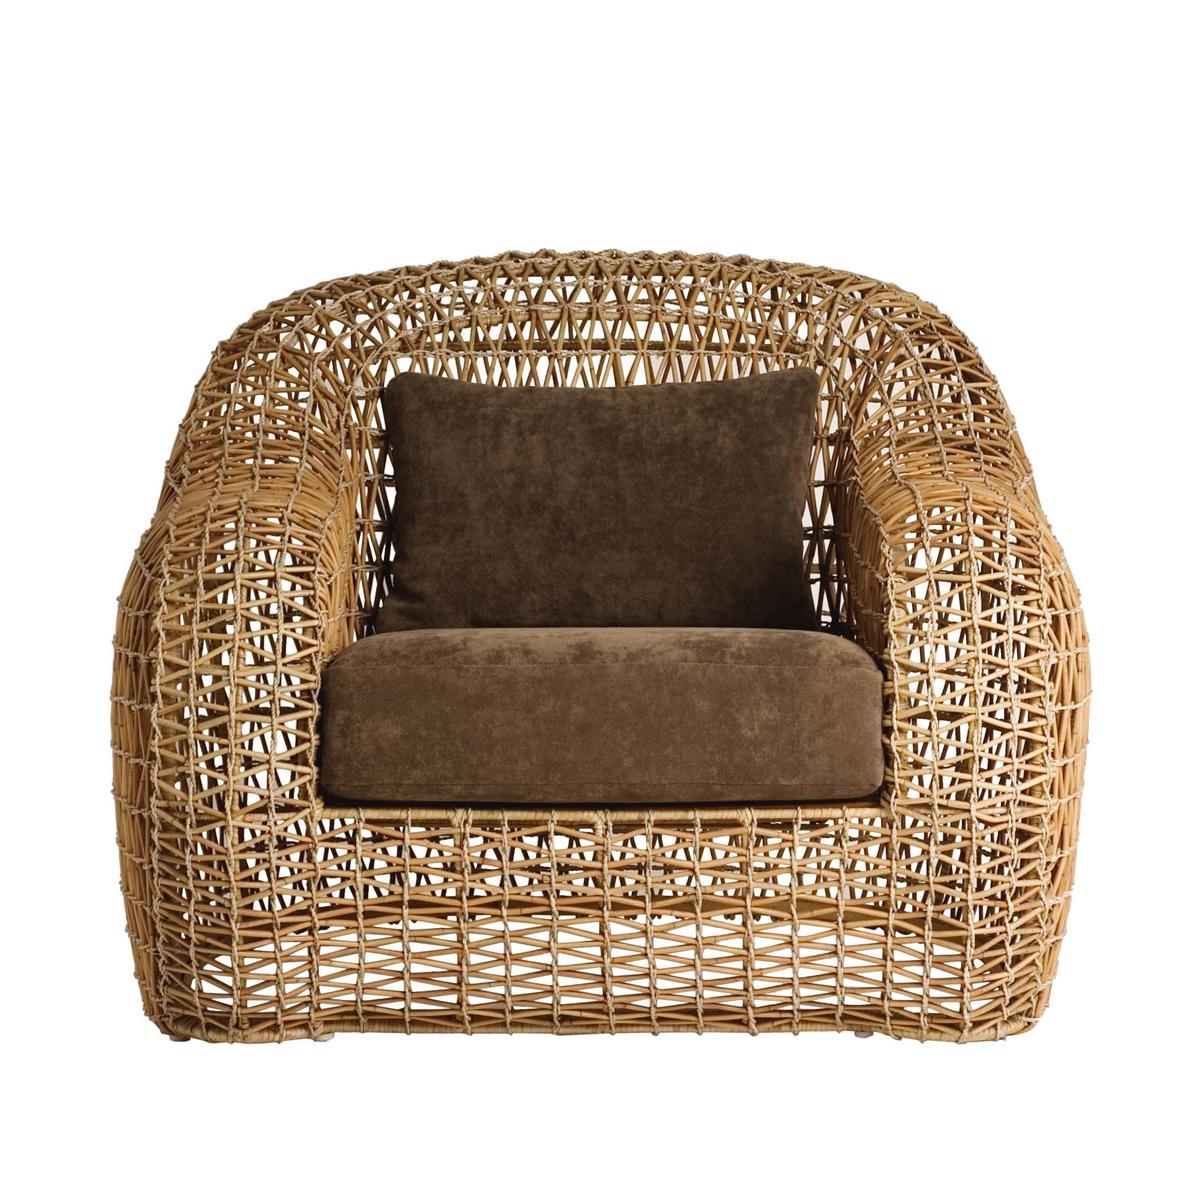 Armchair lombok Indoor or outdoor with
structure in steel and natural rattan. With
cushion seat and back included. Colors
finish in taup, brown, or ocher.
Lead time production if on stock 2-3 weeks,
if not on stock 23-24 weeks.